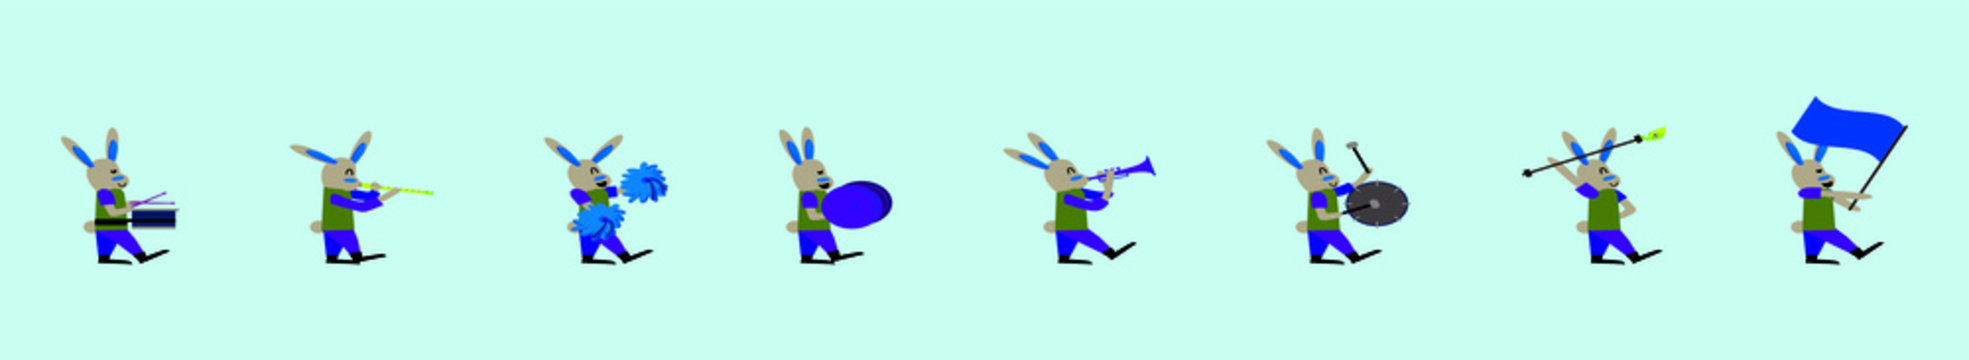 set of rabbit marching band design template with various models. isolated vector illustration on blue